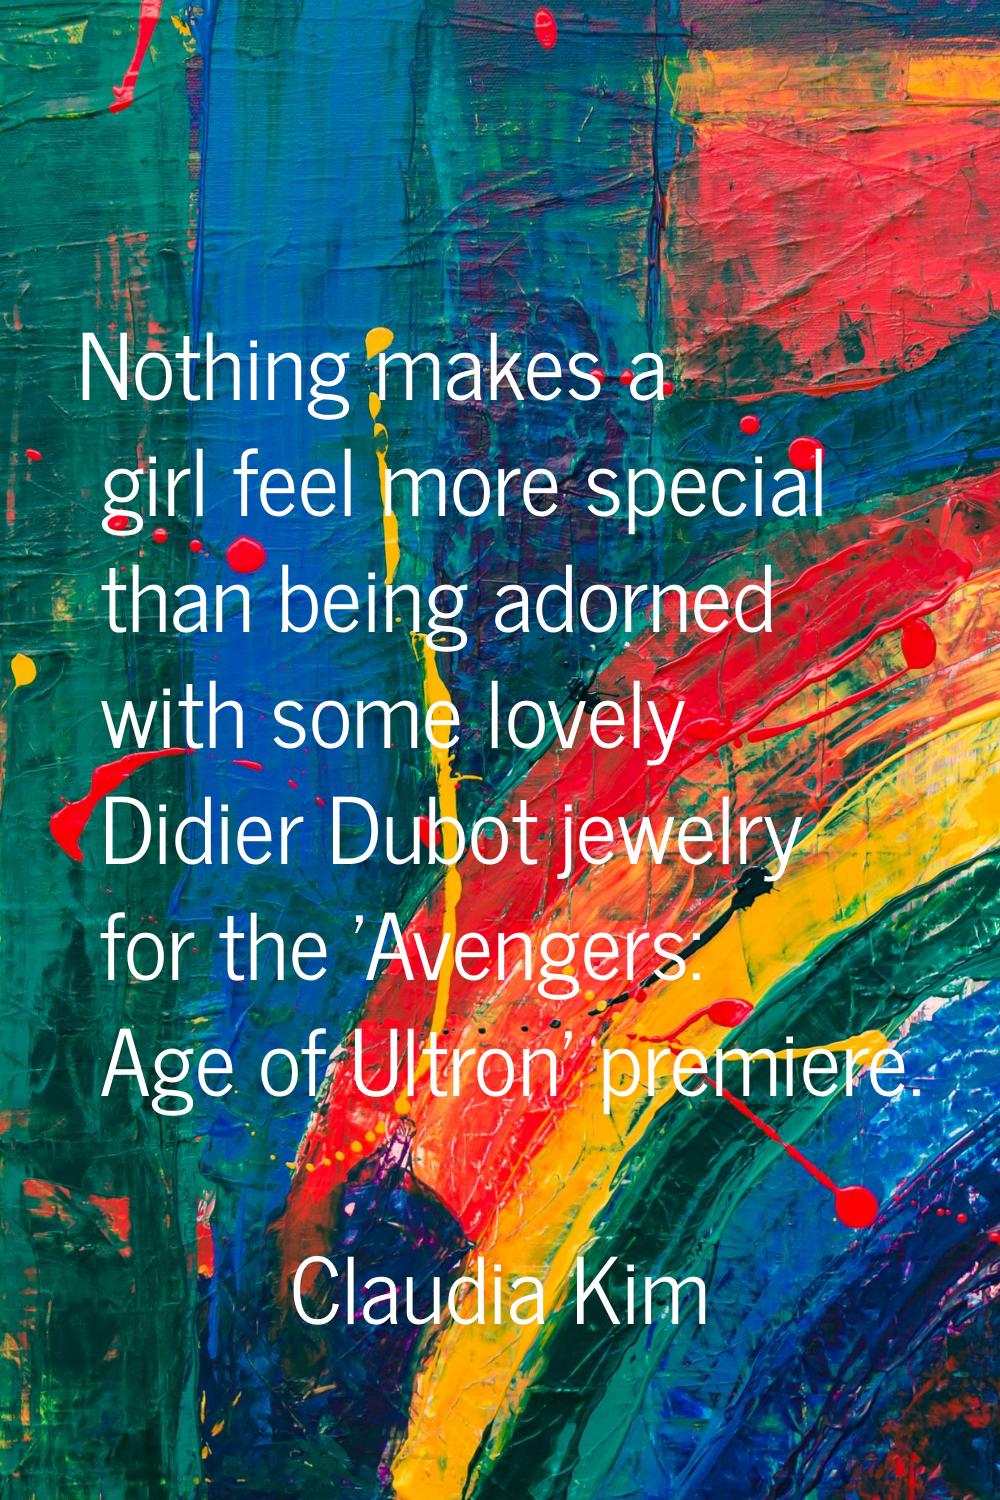 Nothing makes a girl feel more special than being adorned with some lovely Didier Dubot jewelry for